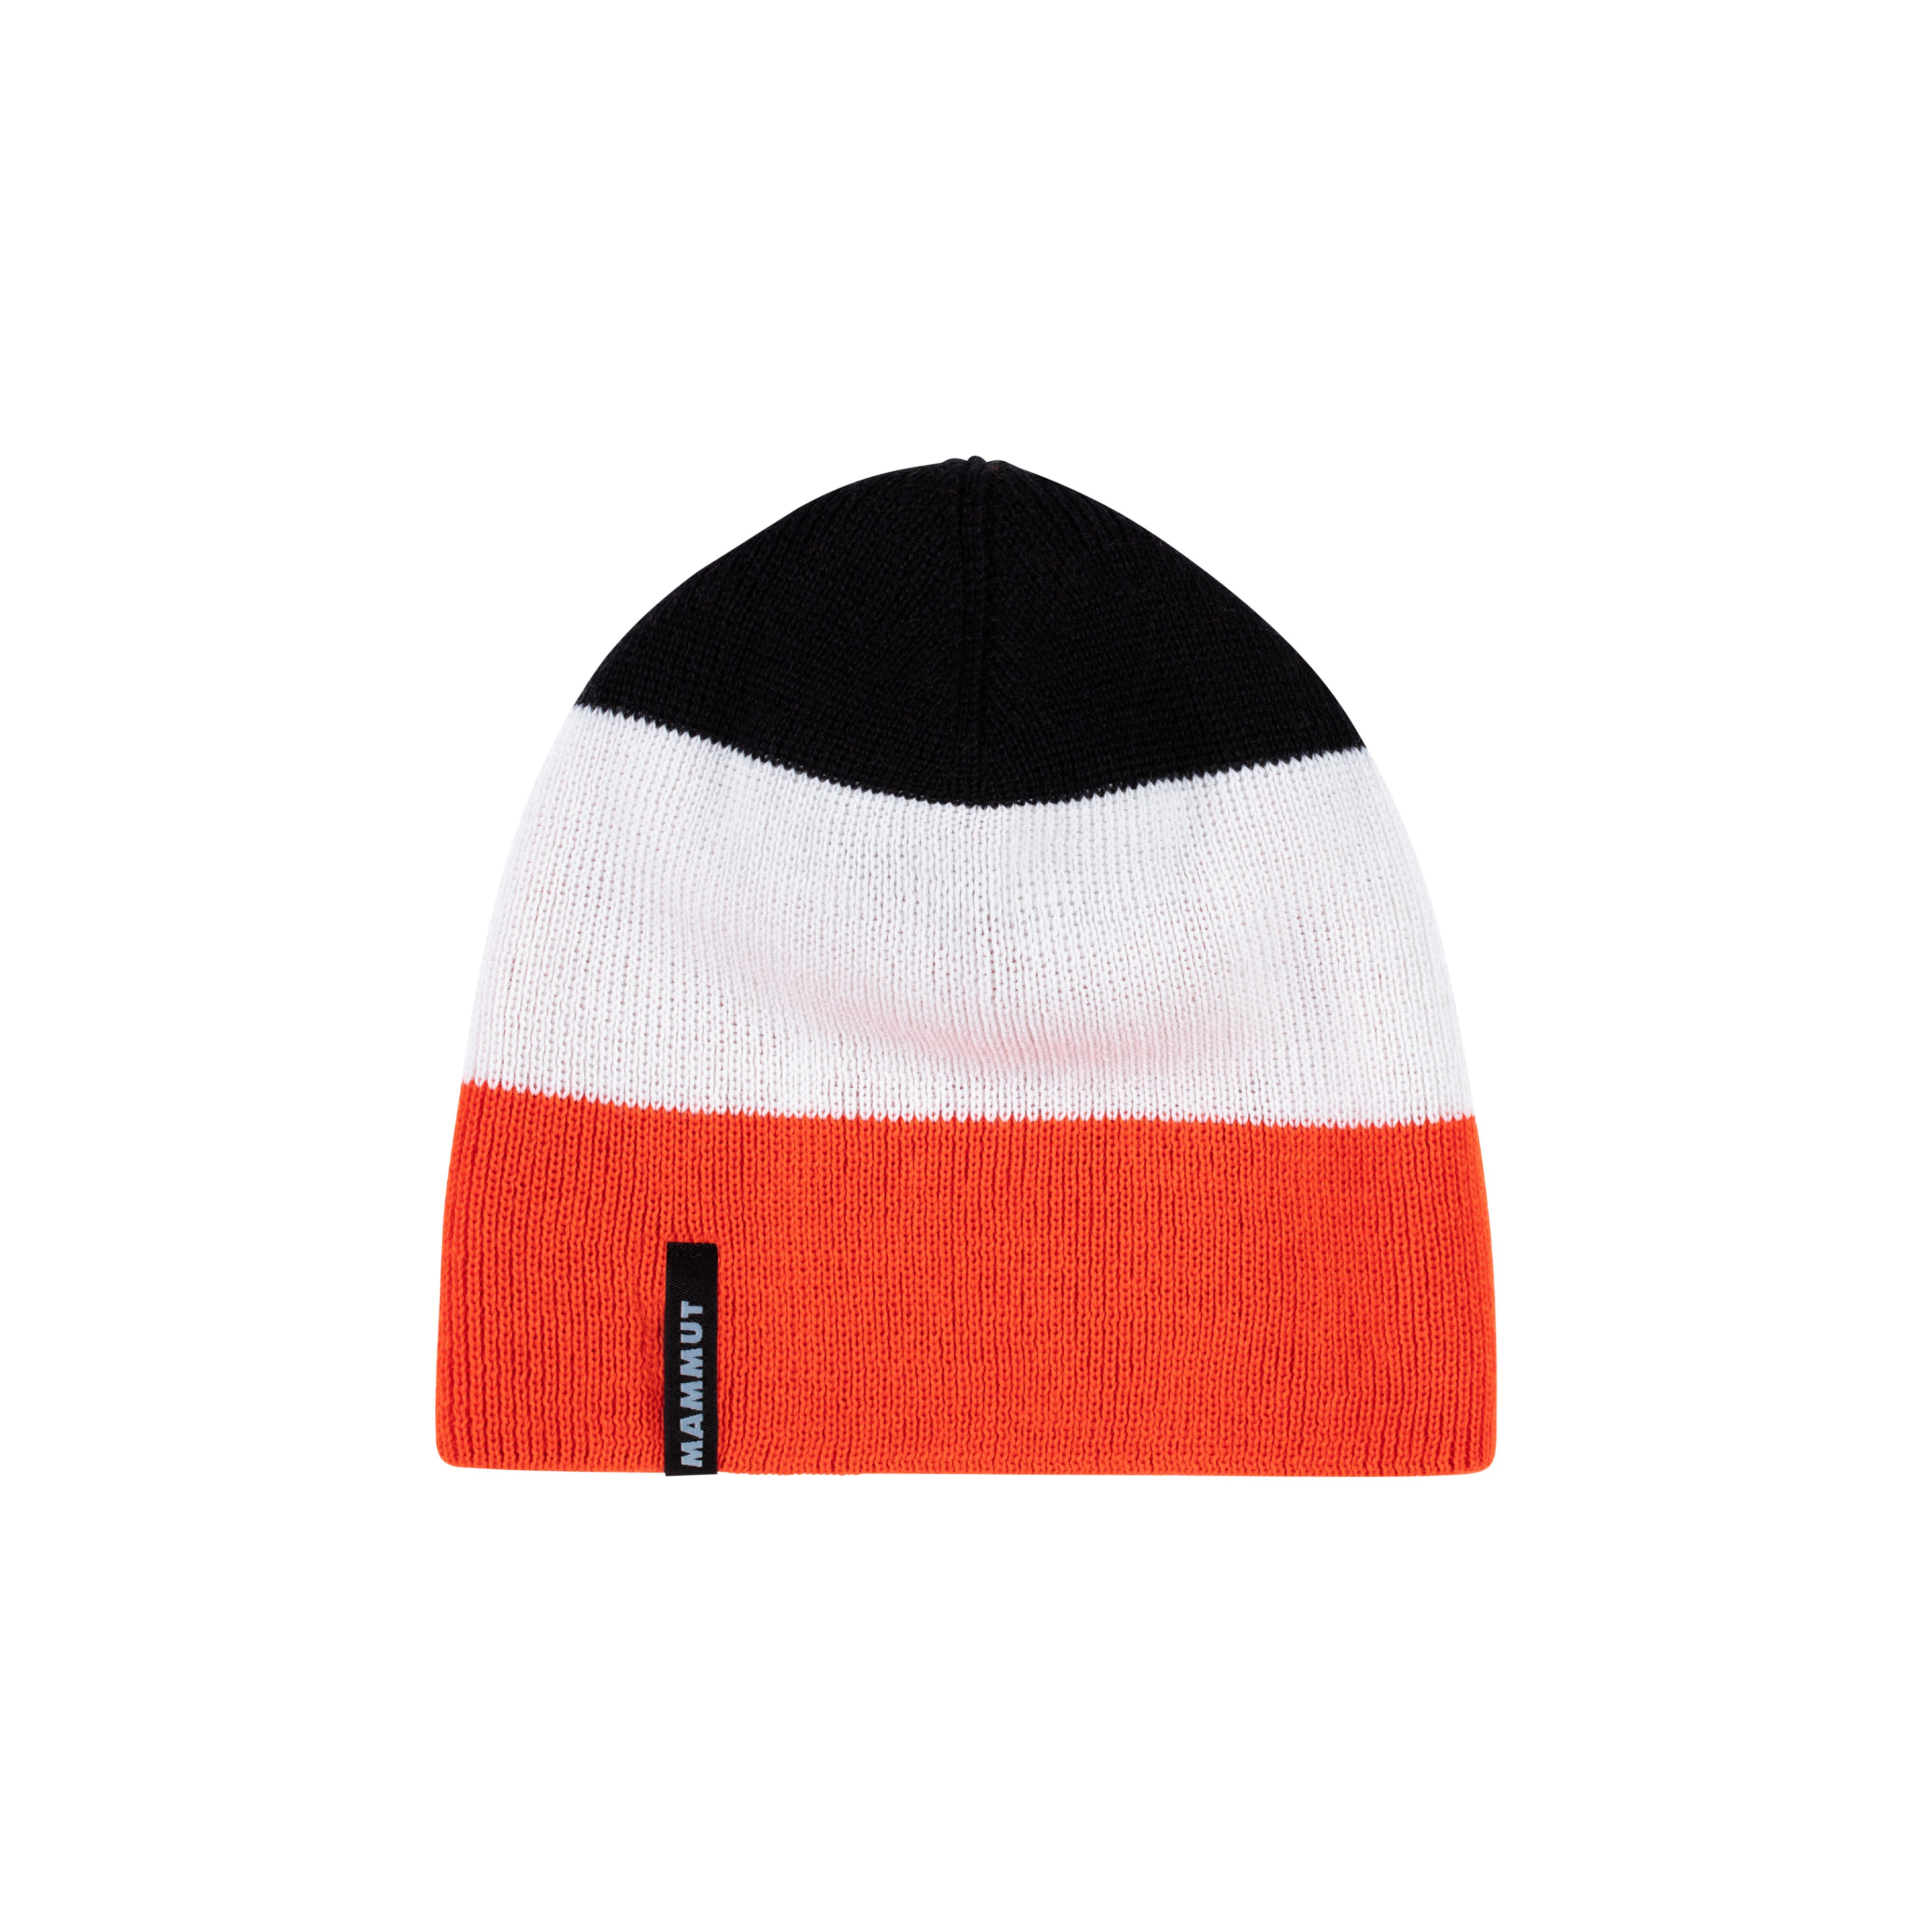 Haldigrat Beanie - hot red-white, one size product image